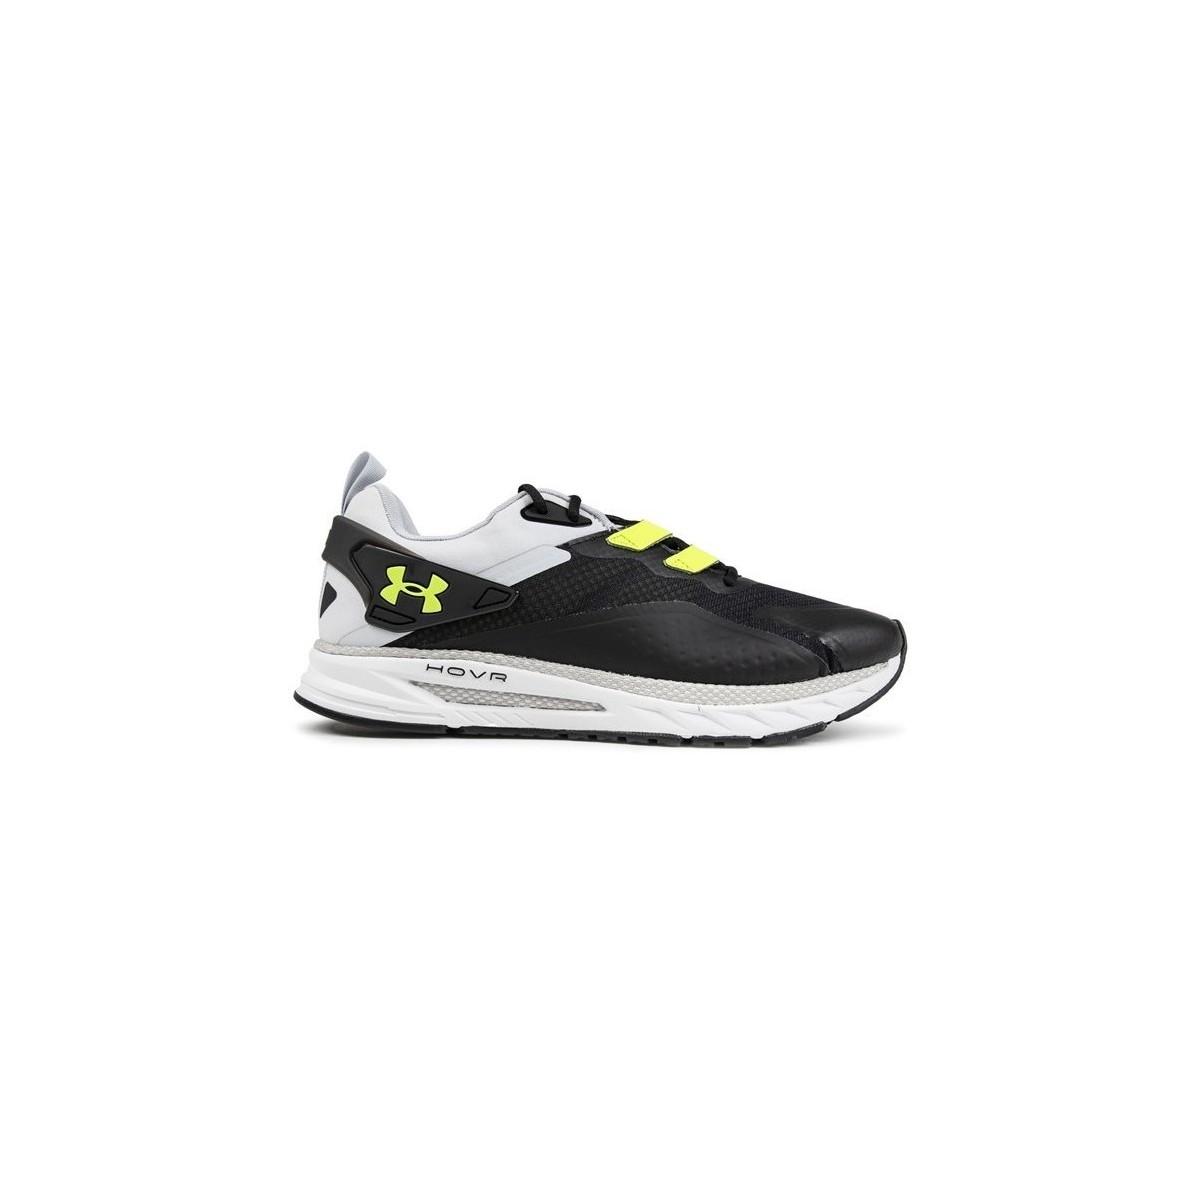 Chaussures Homme Fitness / Training Under Armour Hovr Flux Mvmnt Baskets Style Course Gris